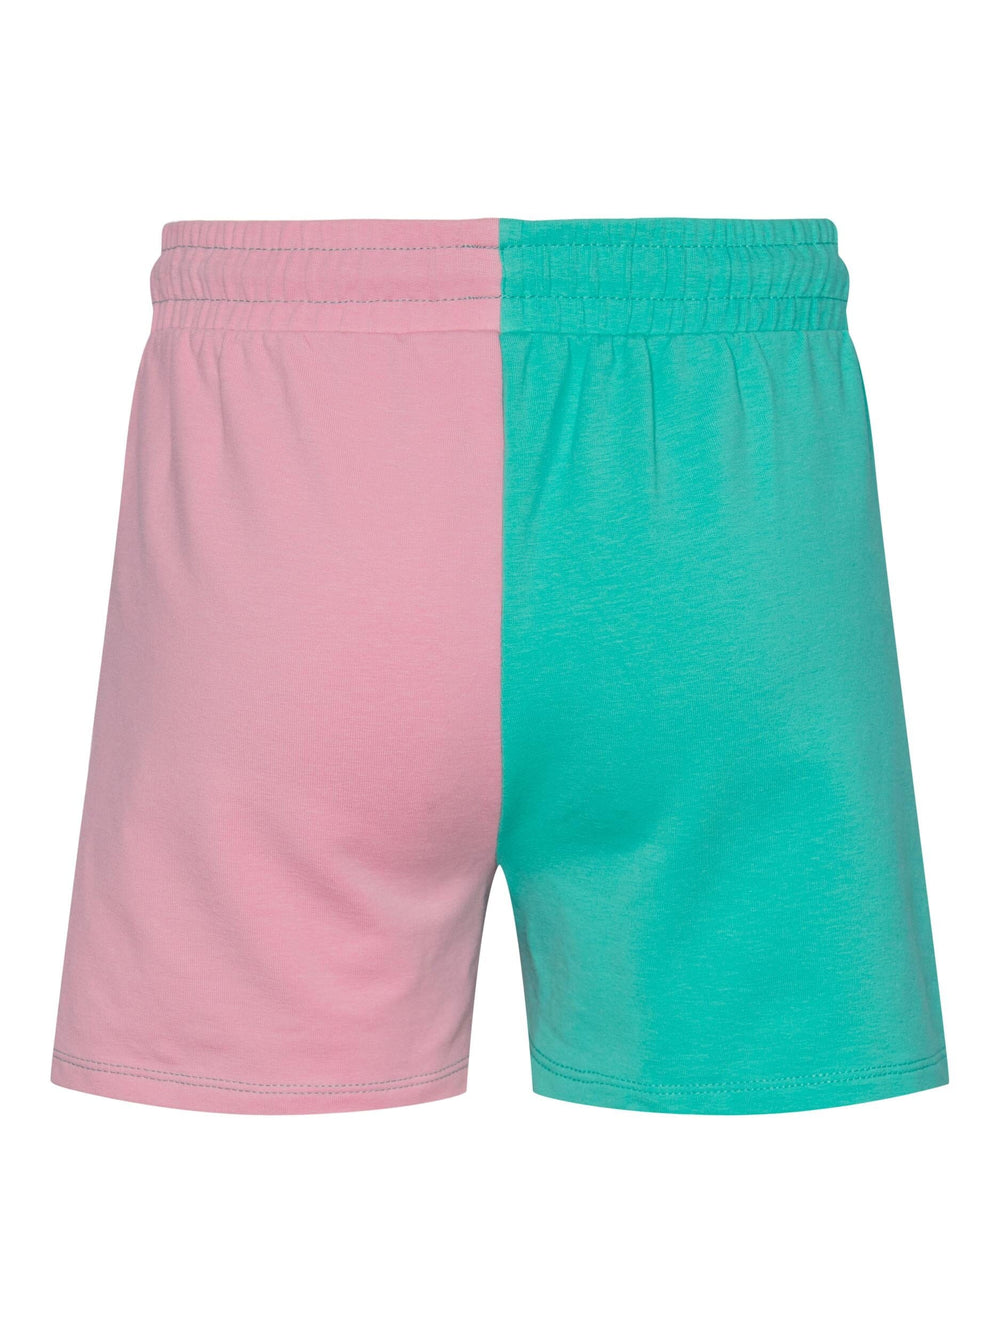 Little Pieces - Pkminna Shorts - Electric Green PRISM PINK Shorts 